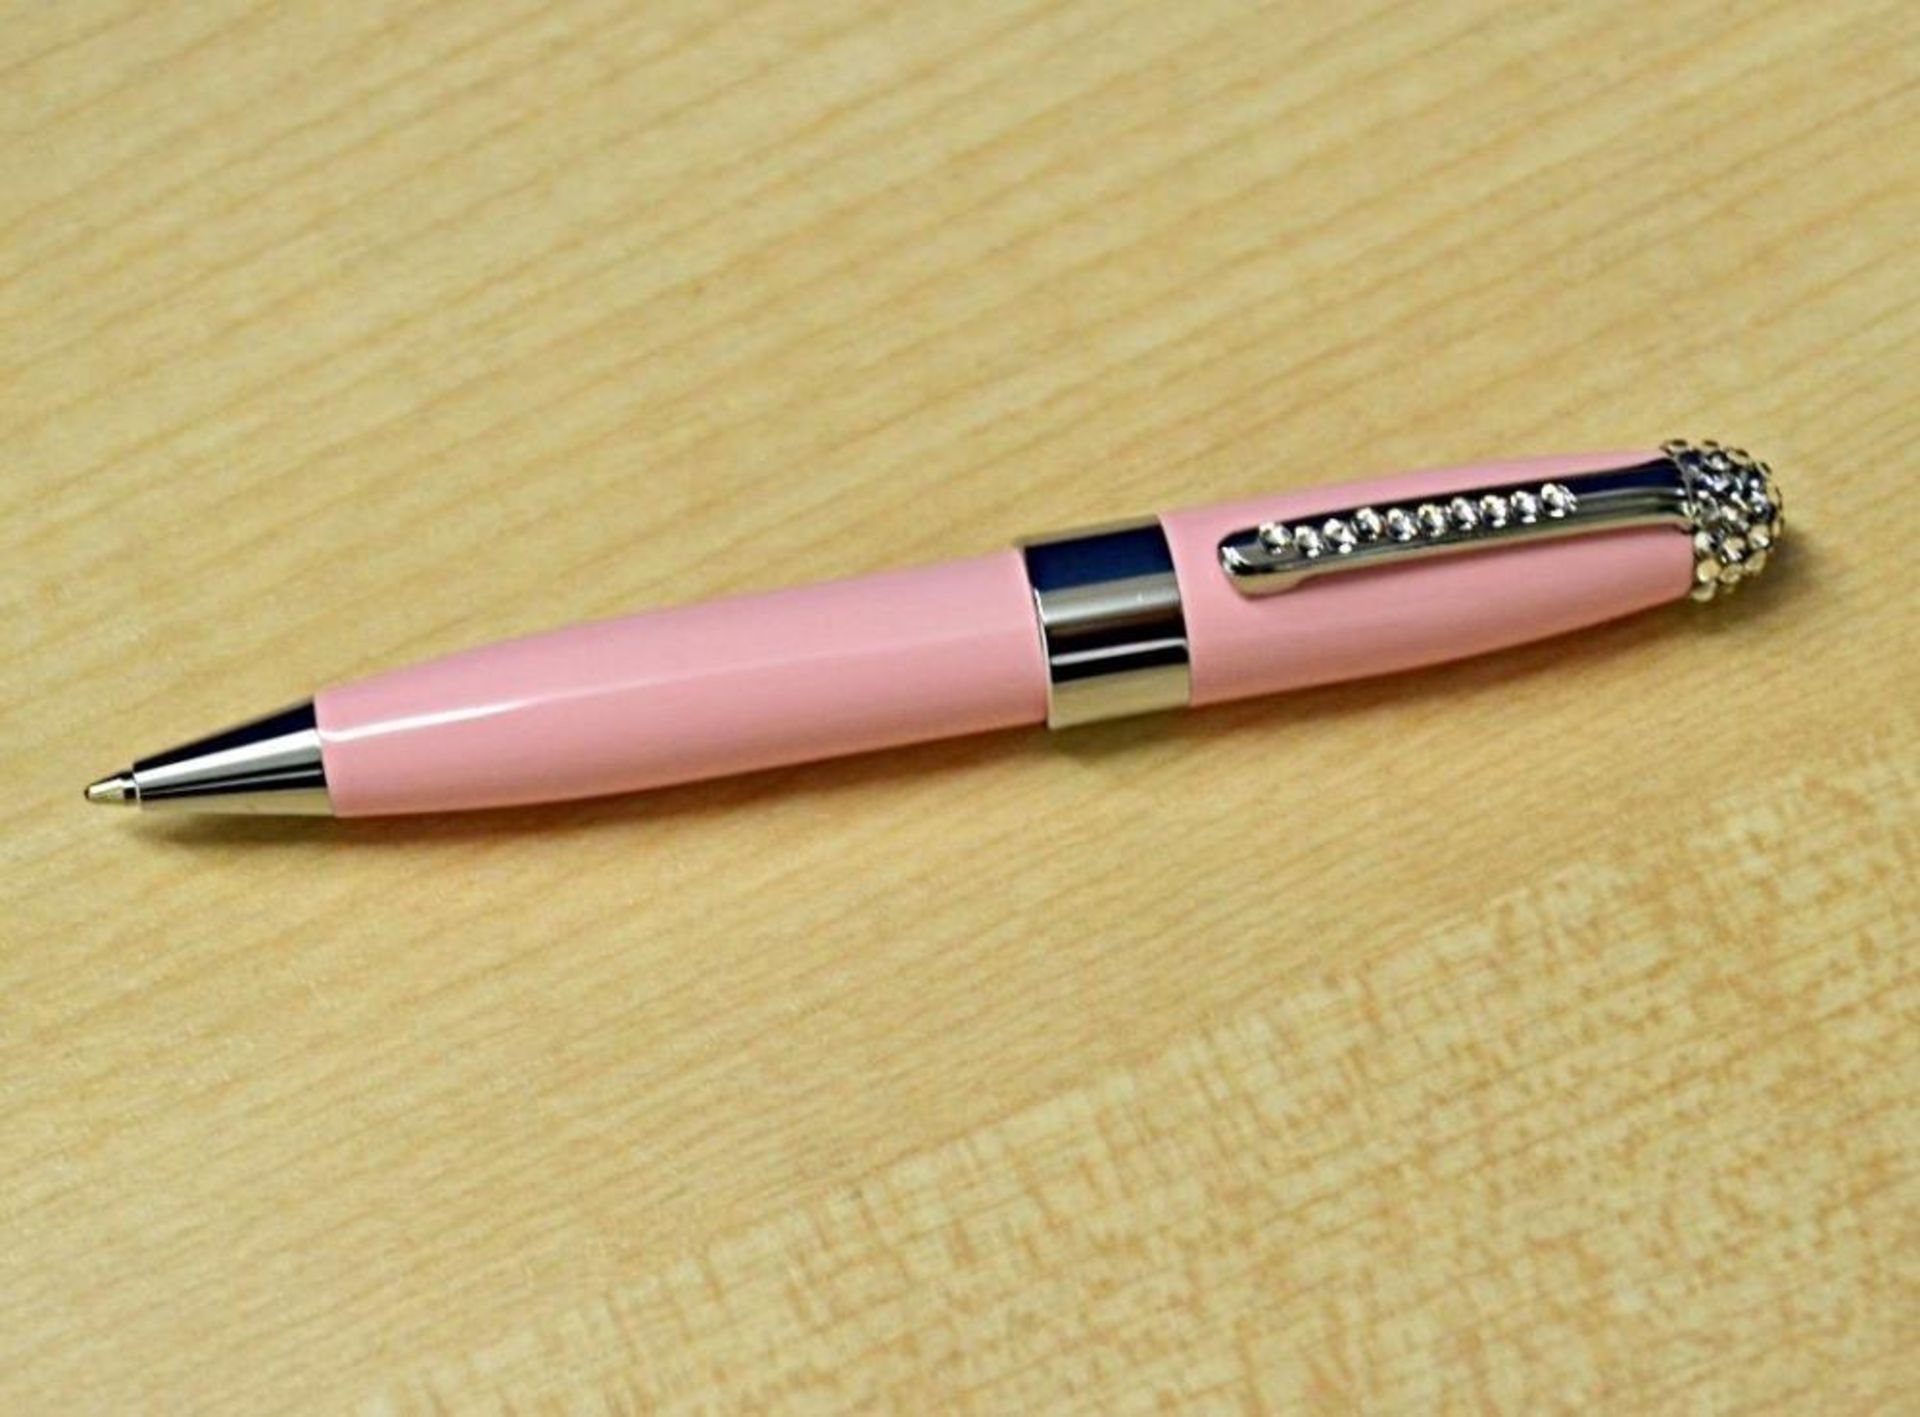 10 x ICE LONDON "Duchess" Ladies Pens - All Embellished With SWAROVSKI Crystals - Colour: Light Pink - Image 3 of 3